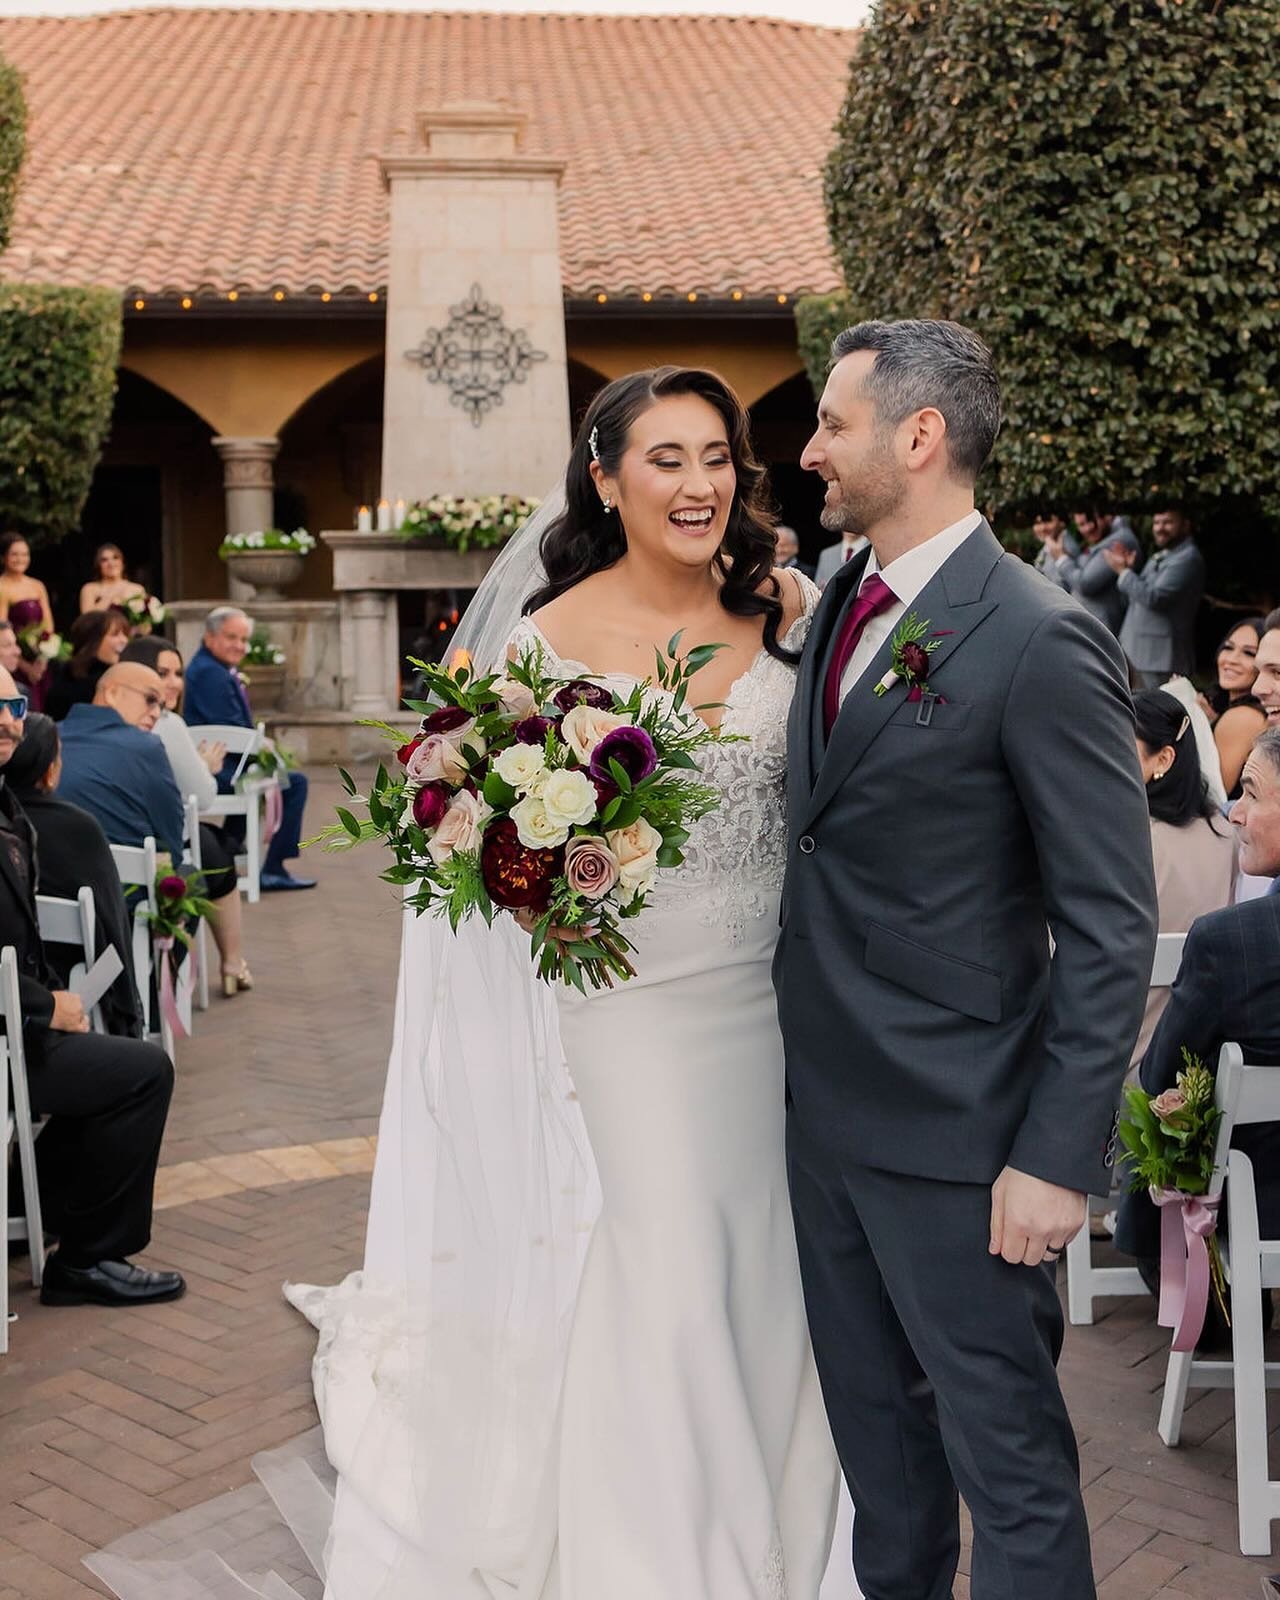 Beautiful weddings are great, but beautiful marriages are better. Hope everyone feels this level of love today. 🥰
.
Photo: @madisonsatterfieldphotography 
Venue: @villasienaweddings 
Florals: @gardengateflowers 
Beauty: @vivianmarianibeauty 
.
#meet